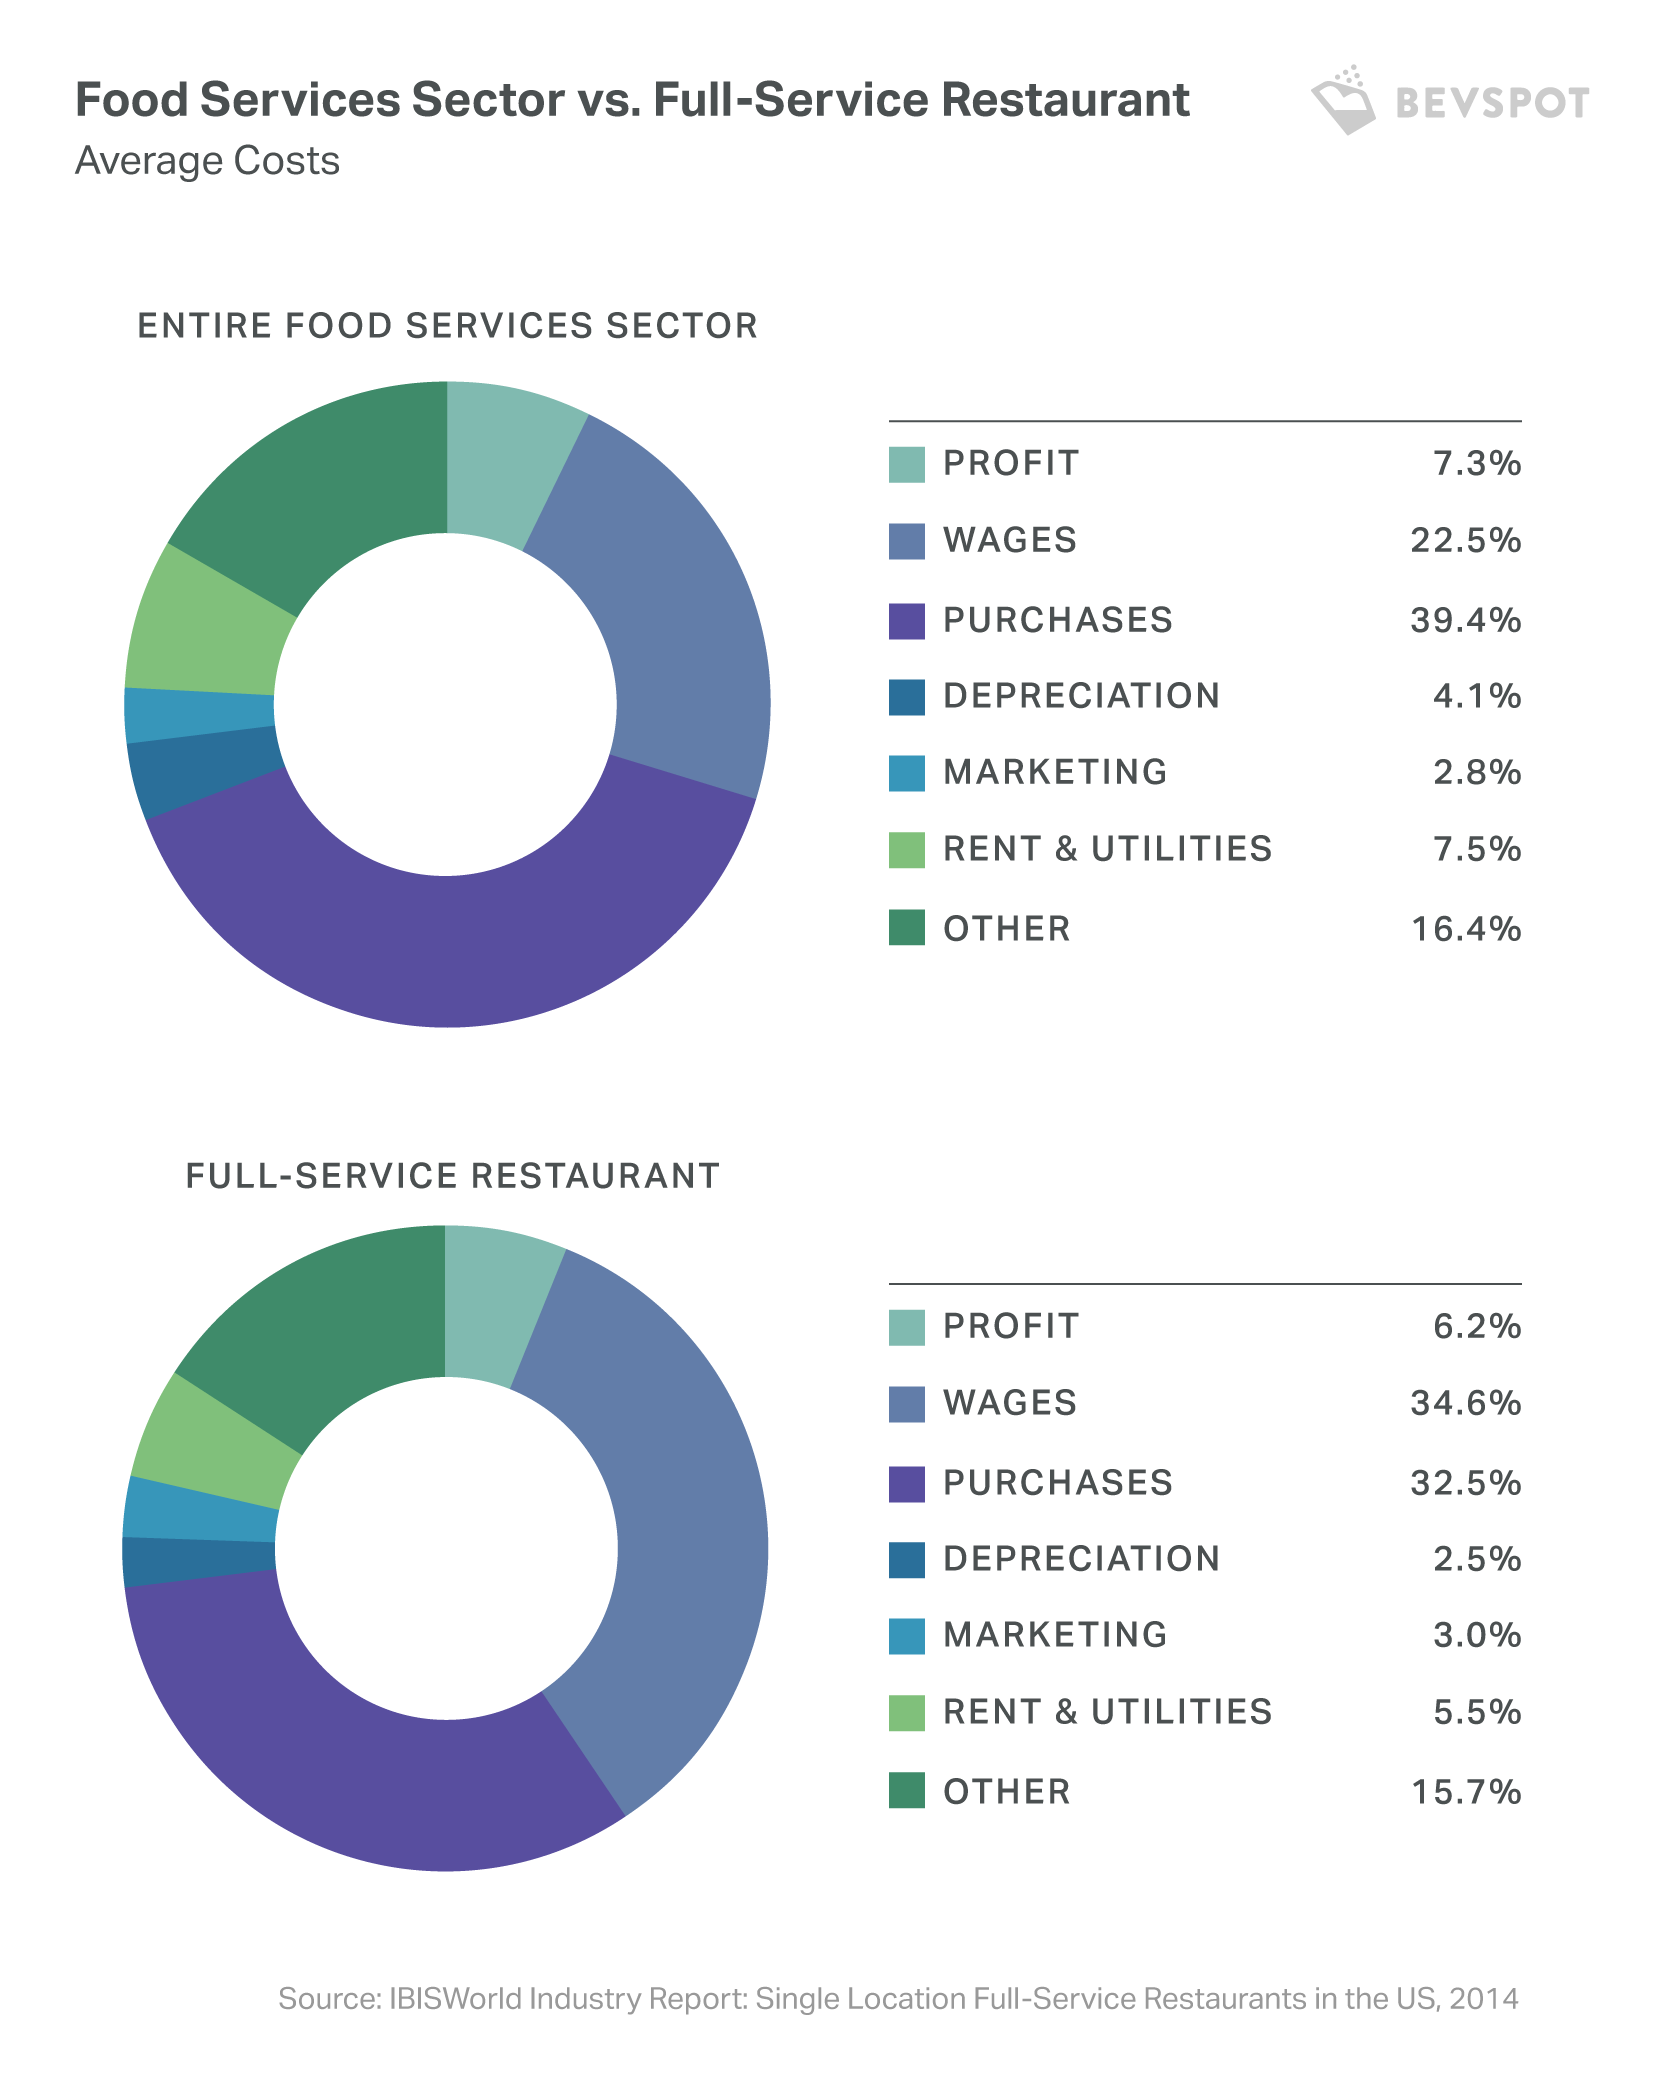 pie charts comparing the average costs across the entire food services sector vs. full-service restaurants